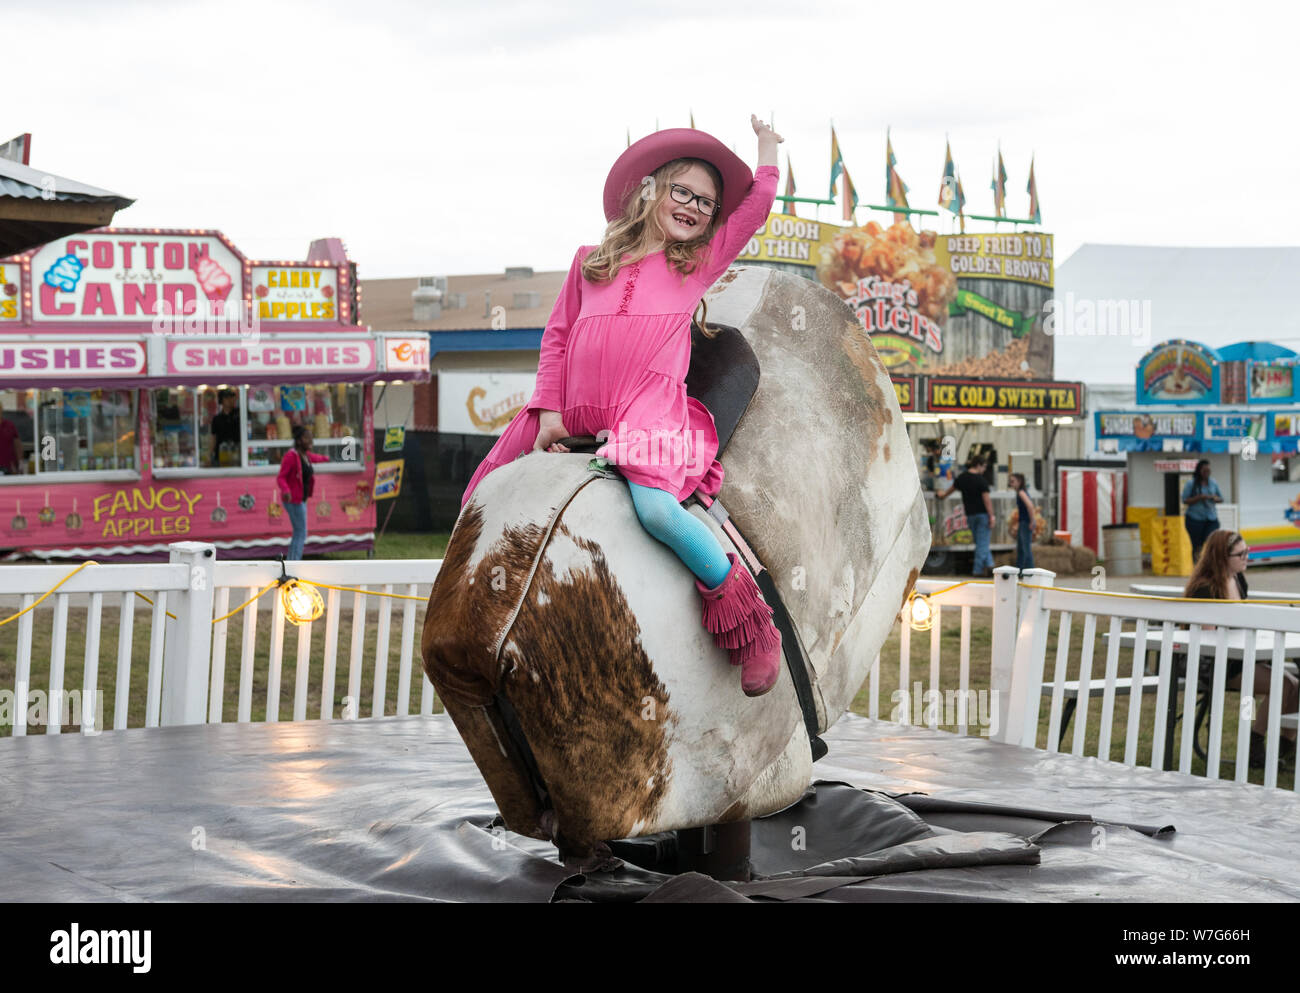 Annabelle Davis gets a taste of mechanical-bull riding at Rodeo Austin, the city's annual stock show and rodeo. Austin, Texas Stock Photo